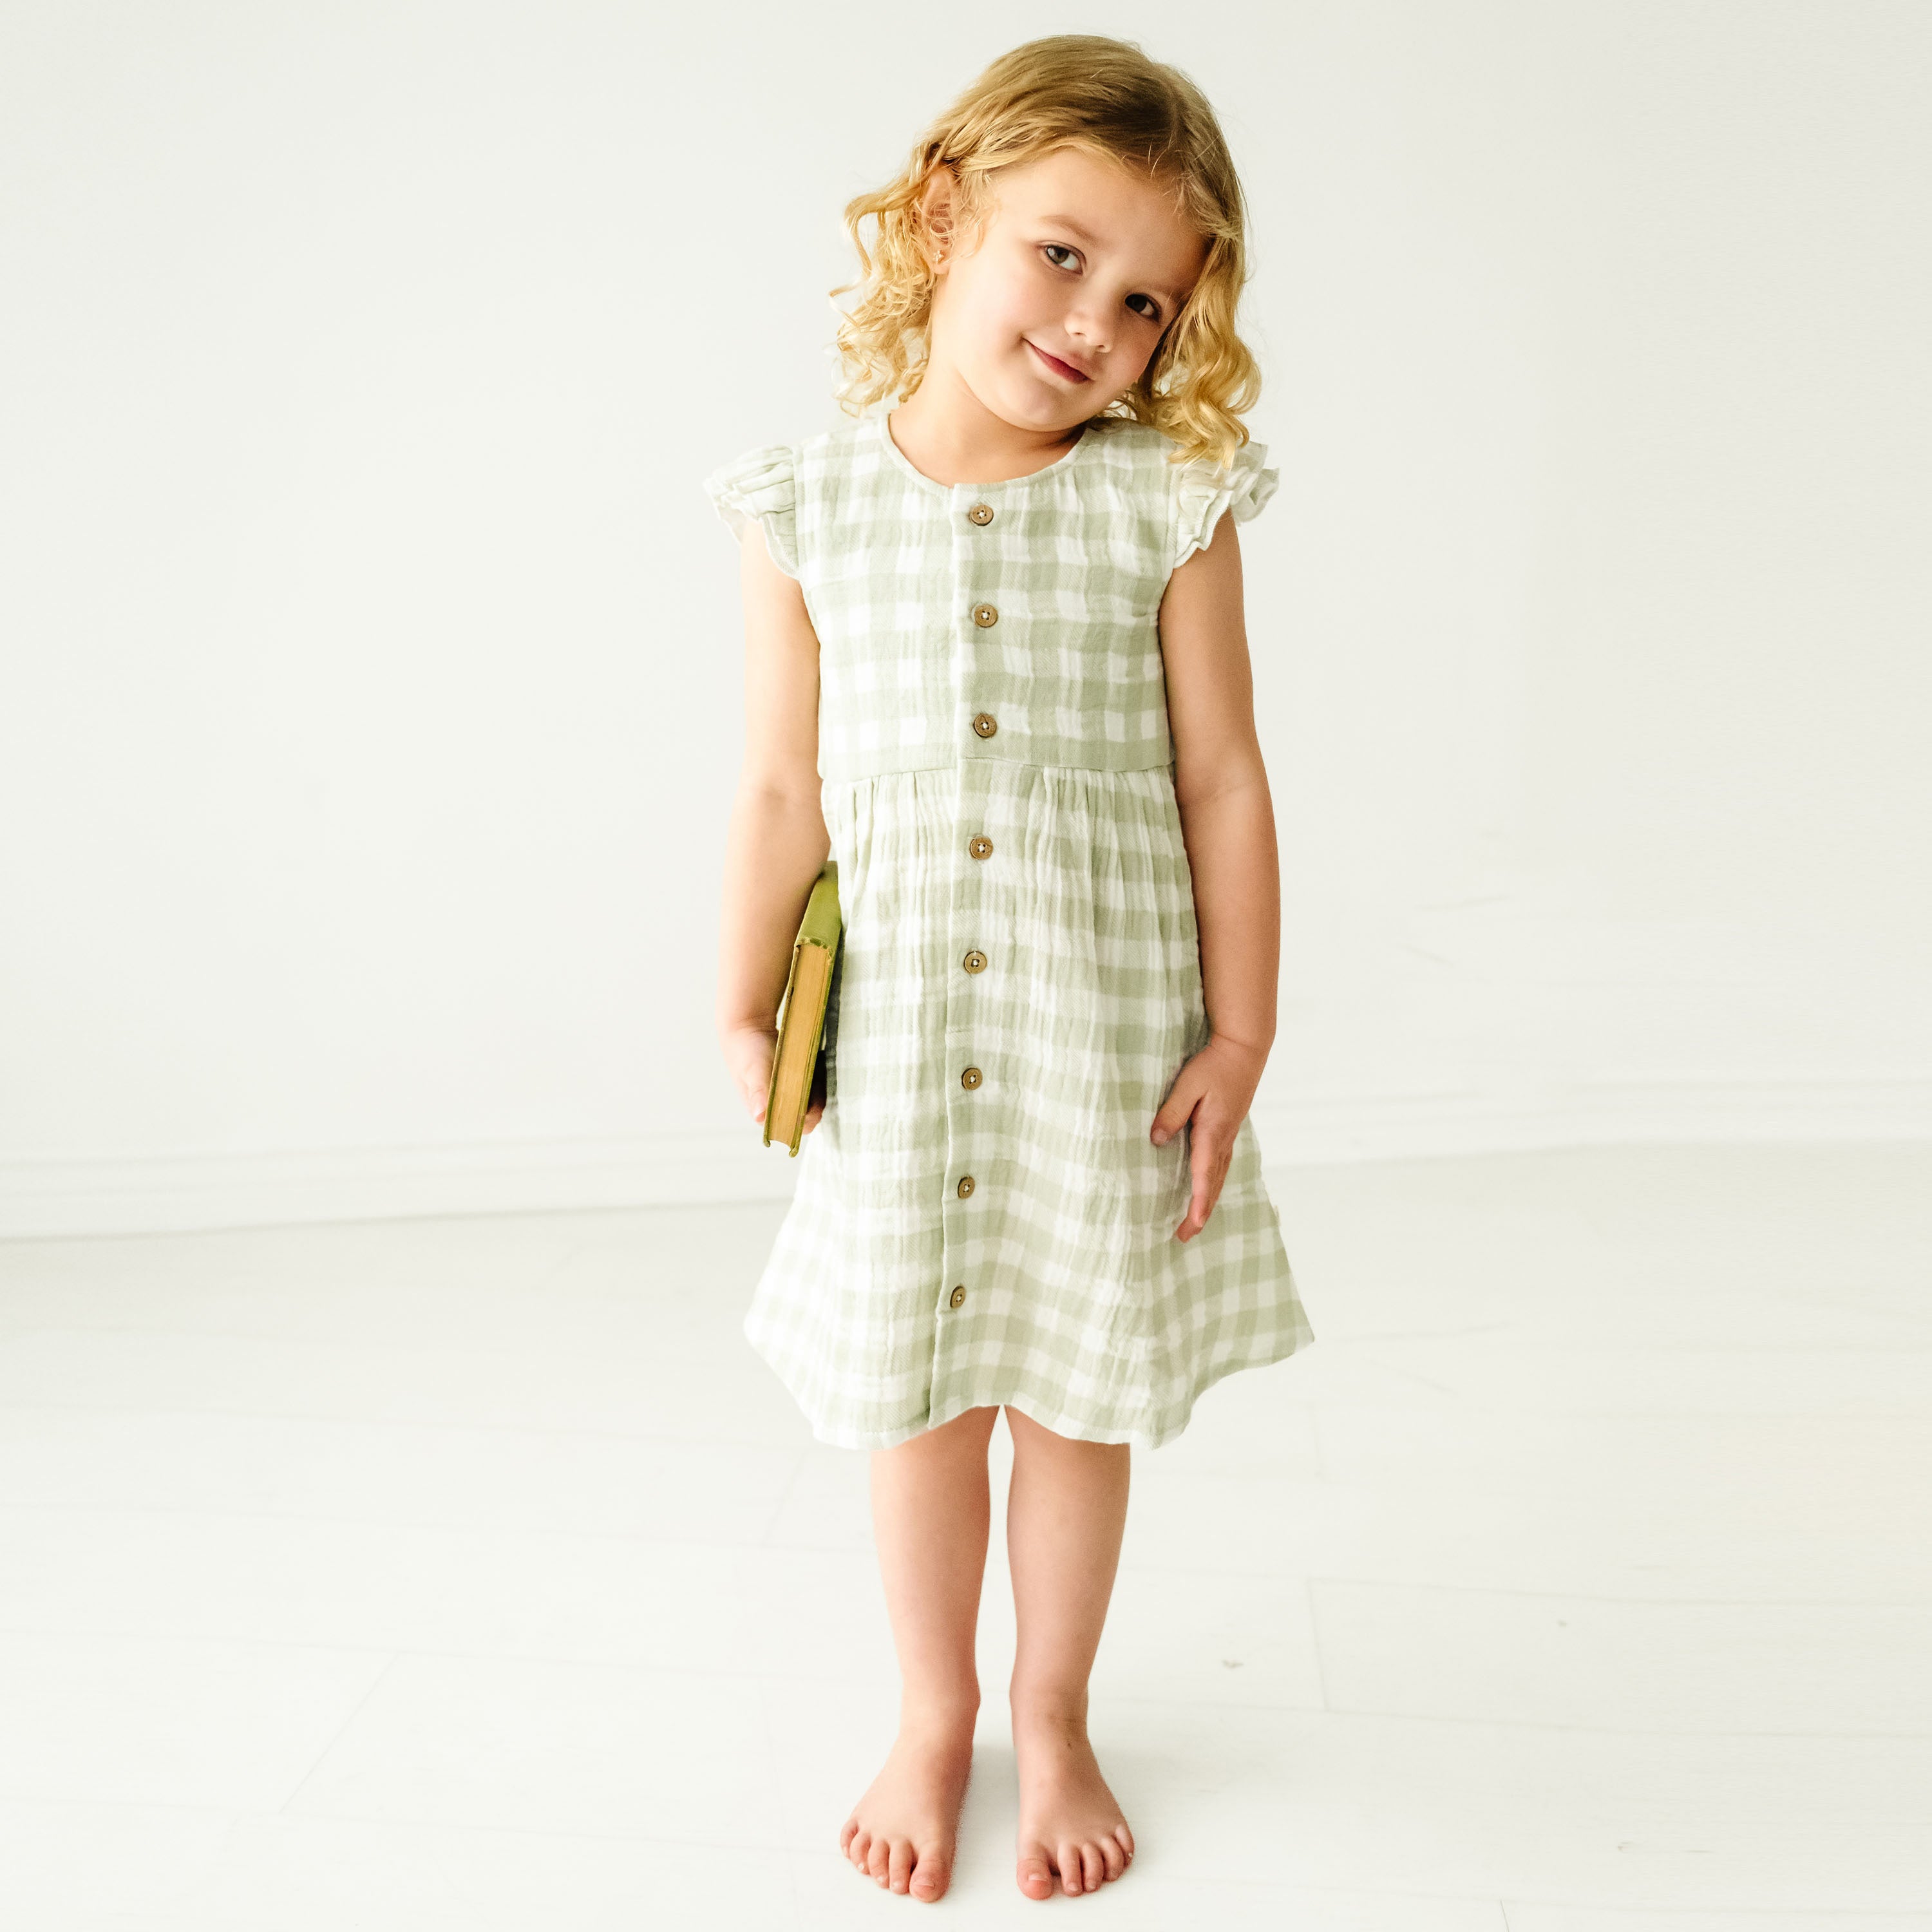 A young boy with curly hair, wearing a Makemake Organics Organic Muslin Button Flutter Dress - Gingham, standing confidently in a plain white studio, holding a book under his arm.